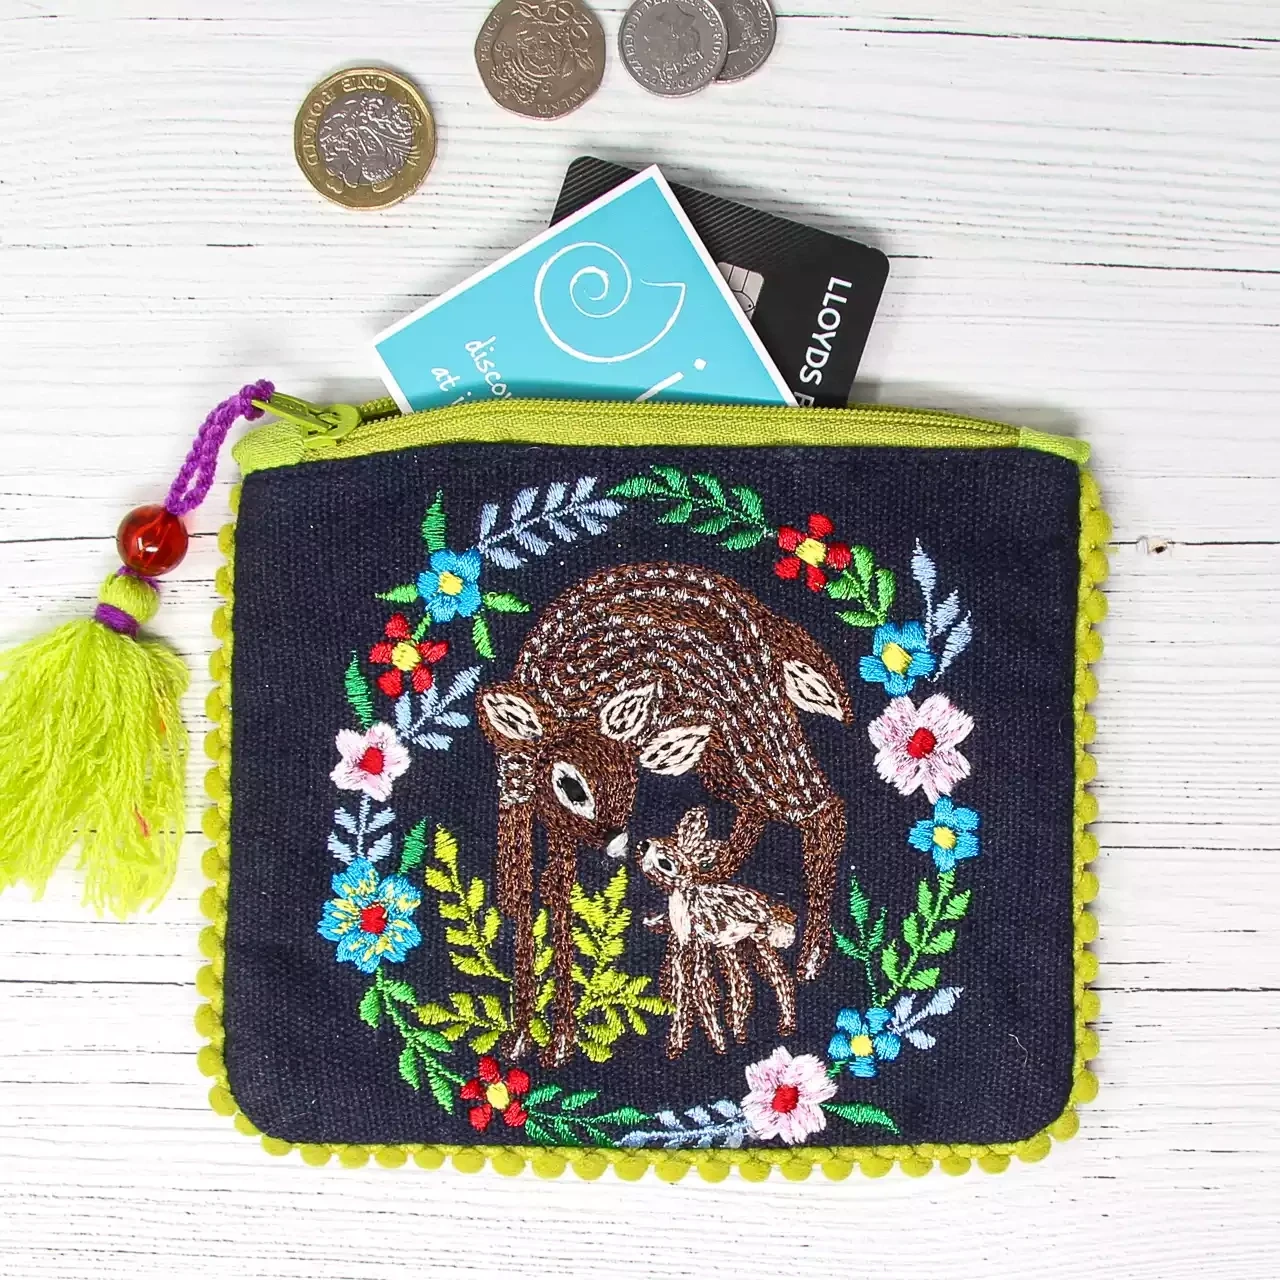 Embroidered Purse - Deer by Namaste